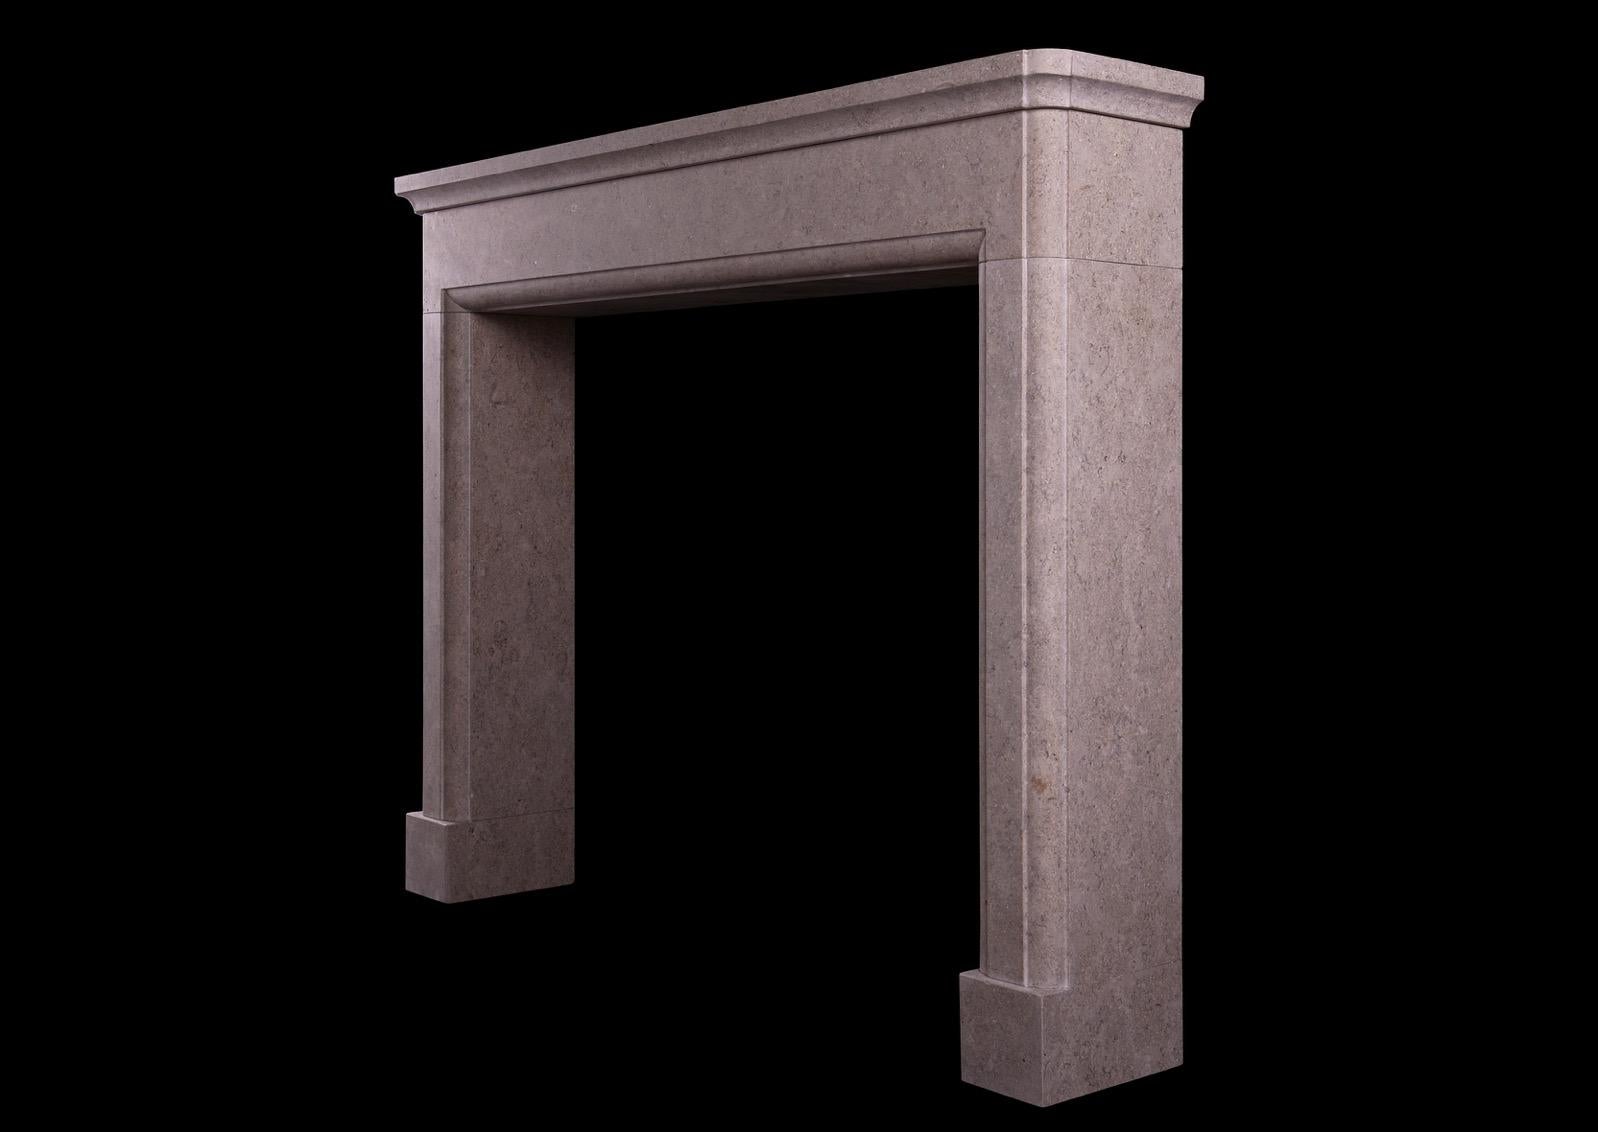 French Provincial Architectural Fireplace in Pearl Beige Limestone For Sale